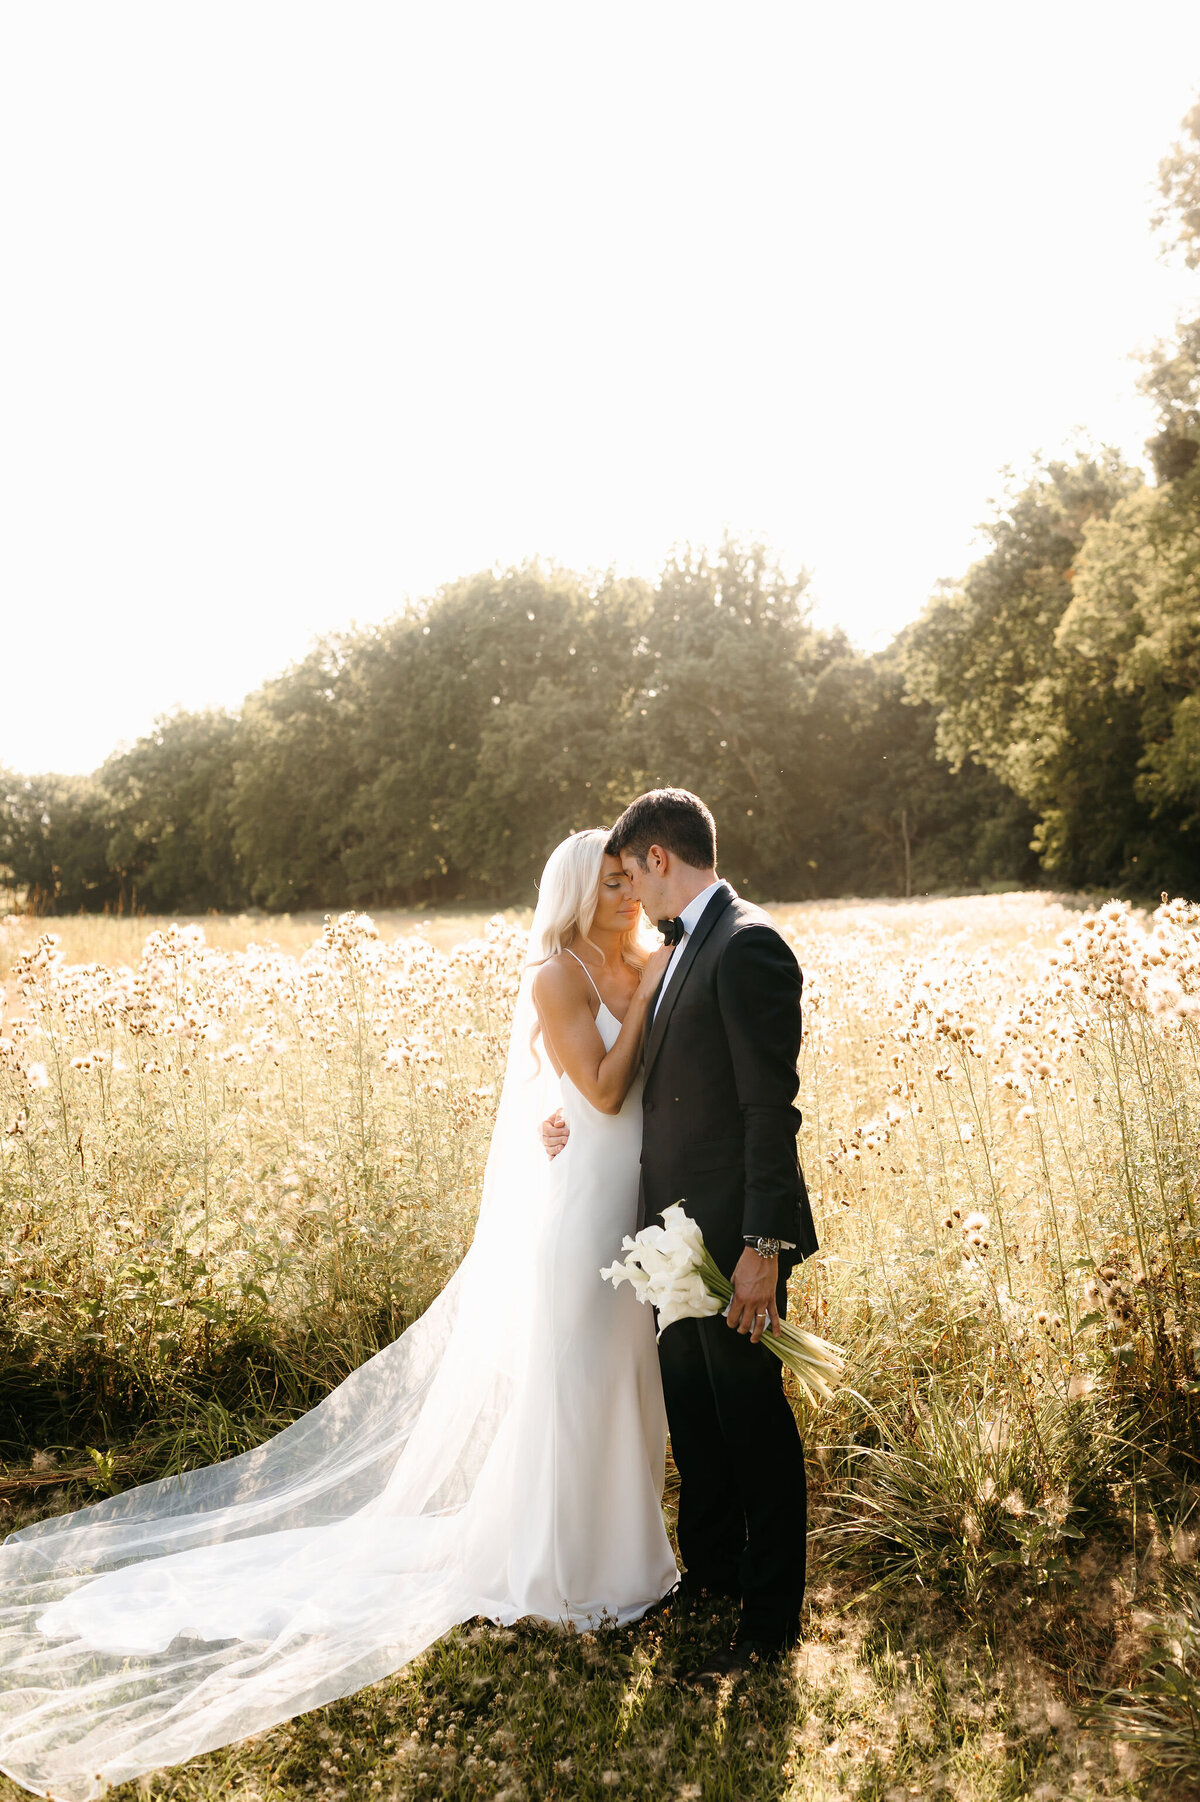 Outdoor Wedding By Lisa Blanche Photography